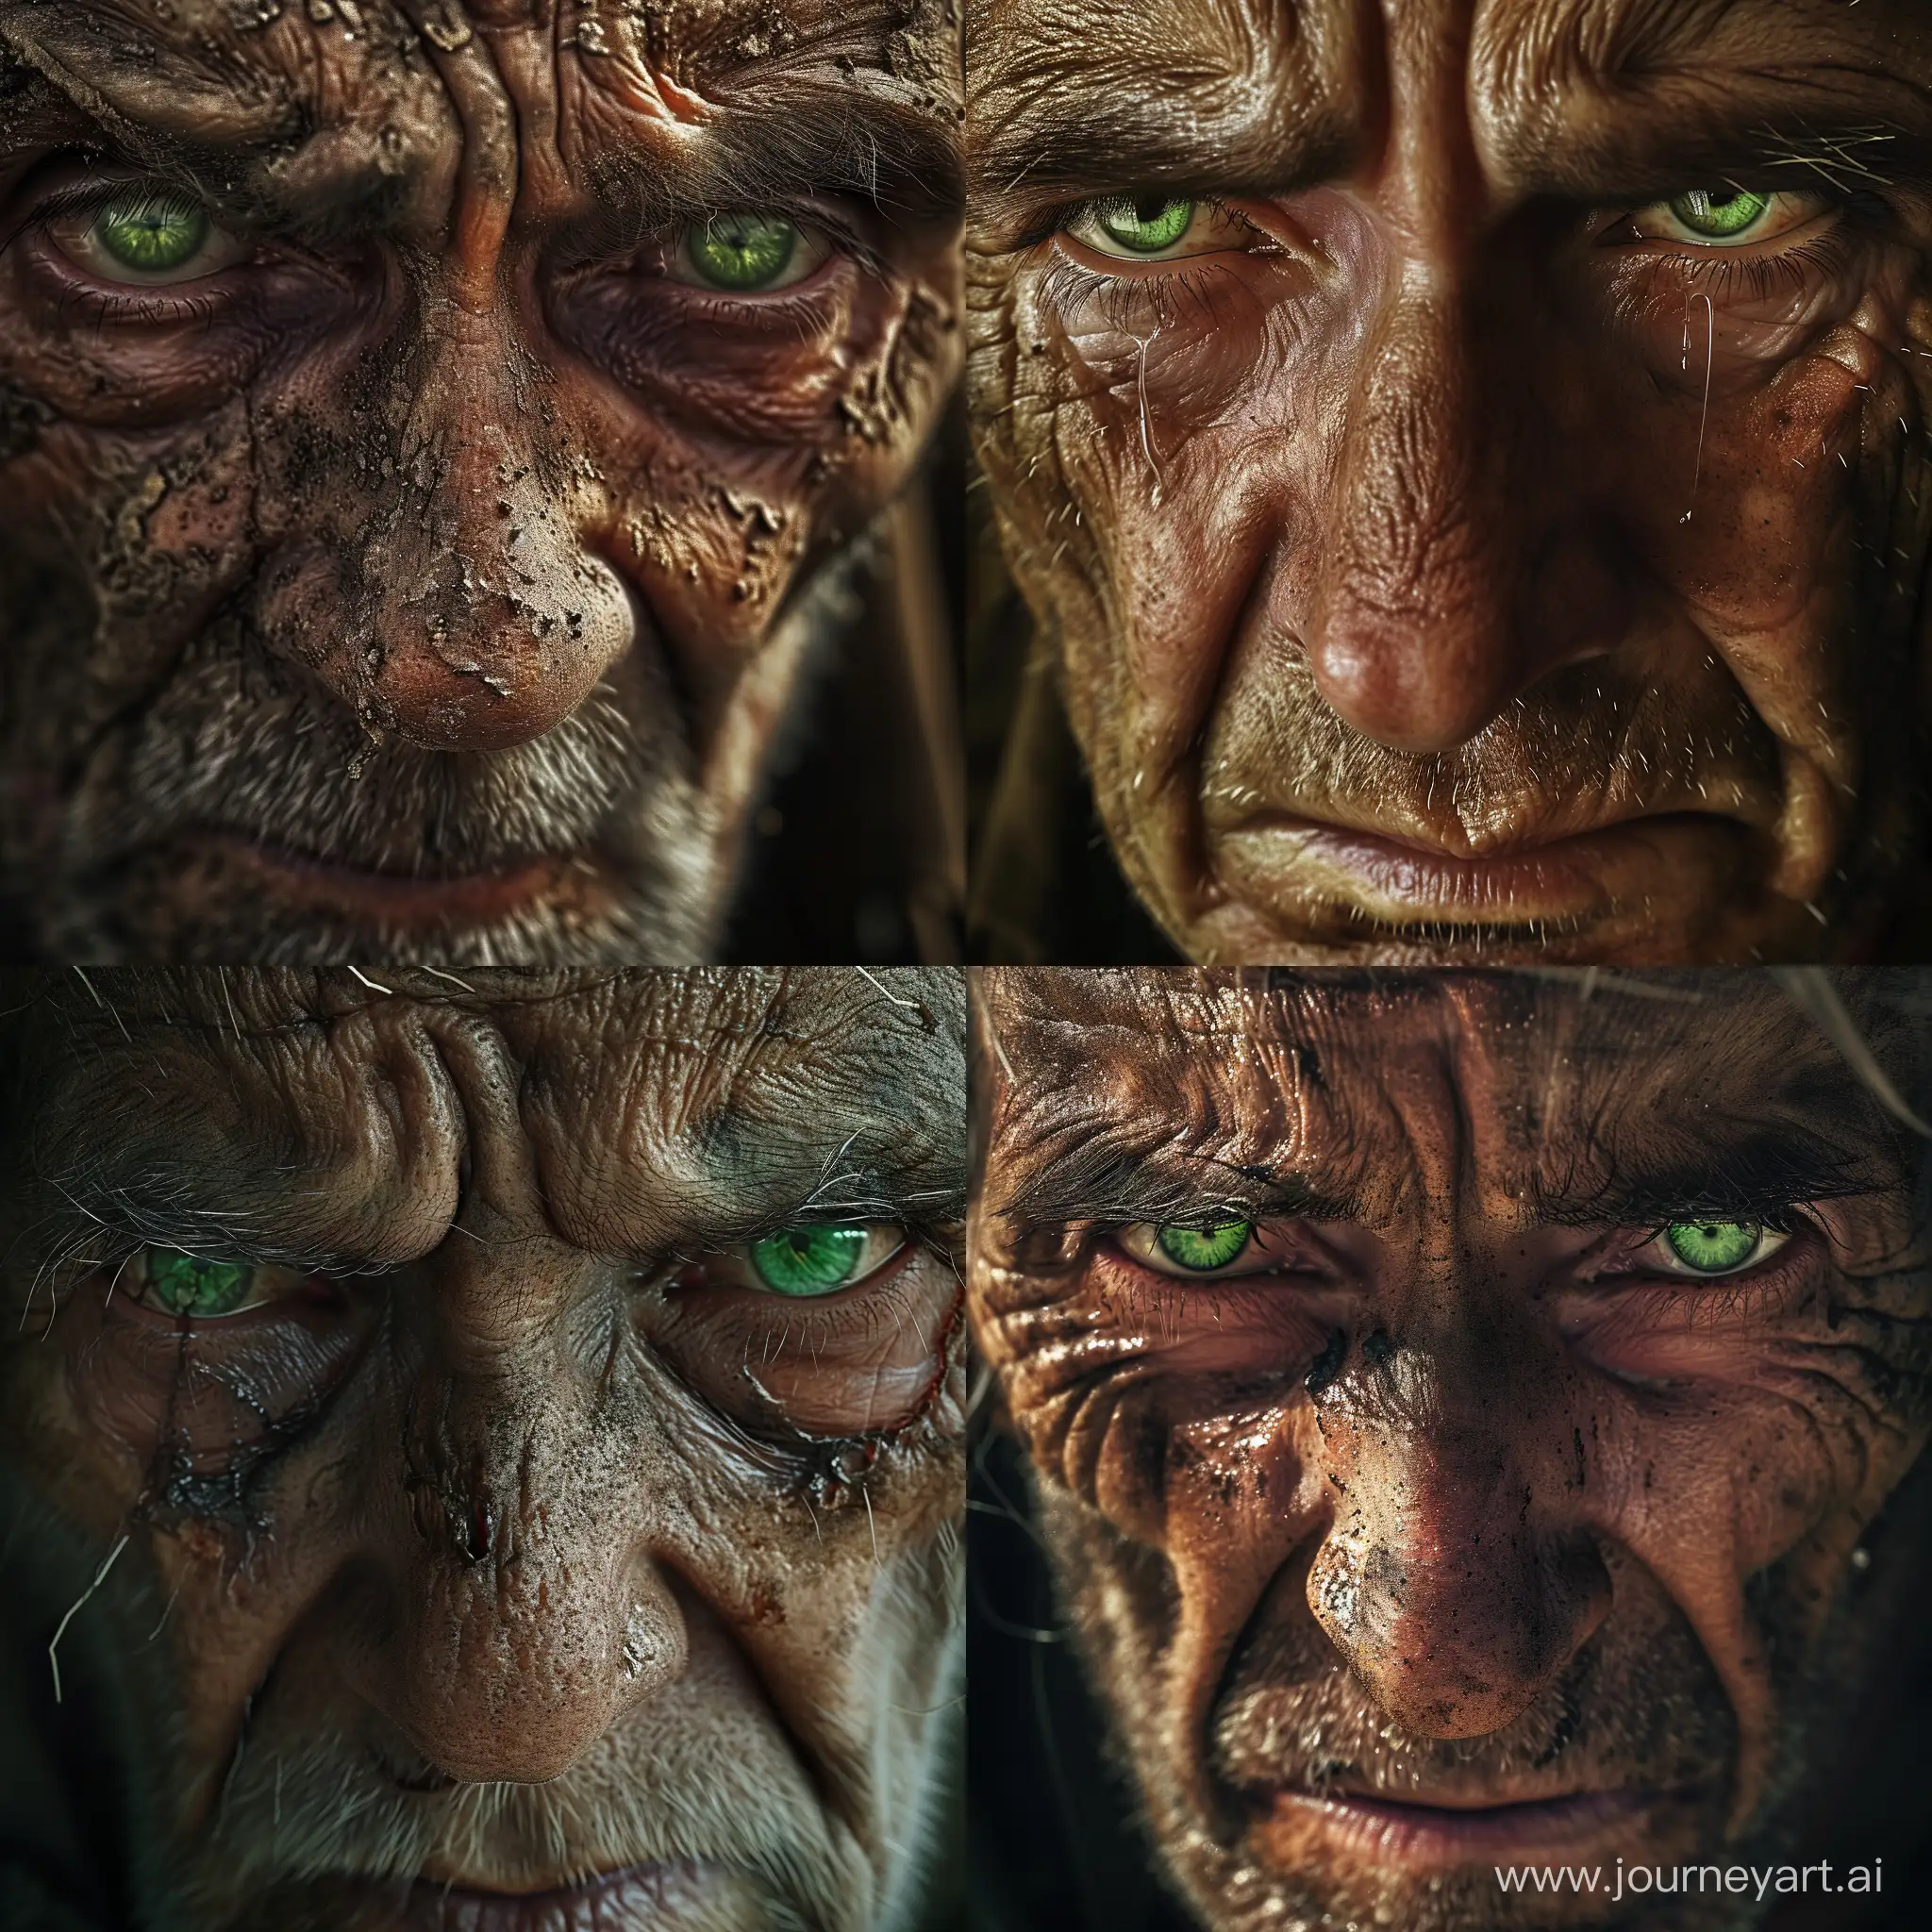 hyper realistic close up photo of sad homeless person. show details of face including wrinkles and dirt. green teary eyes. 